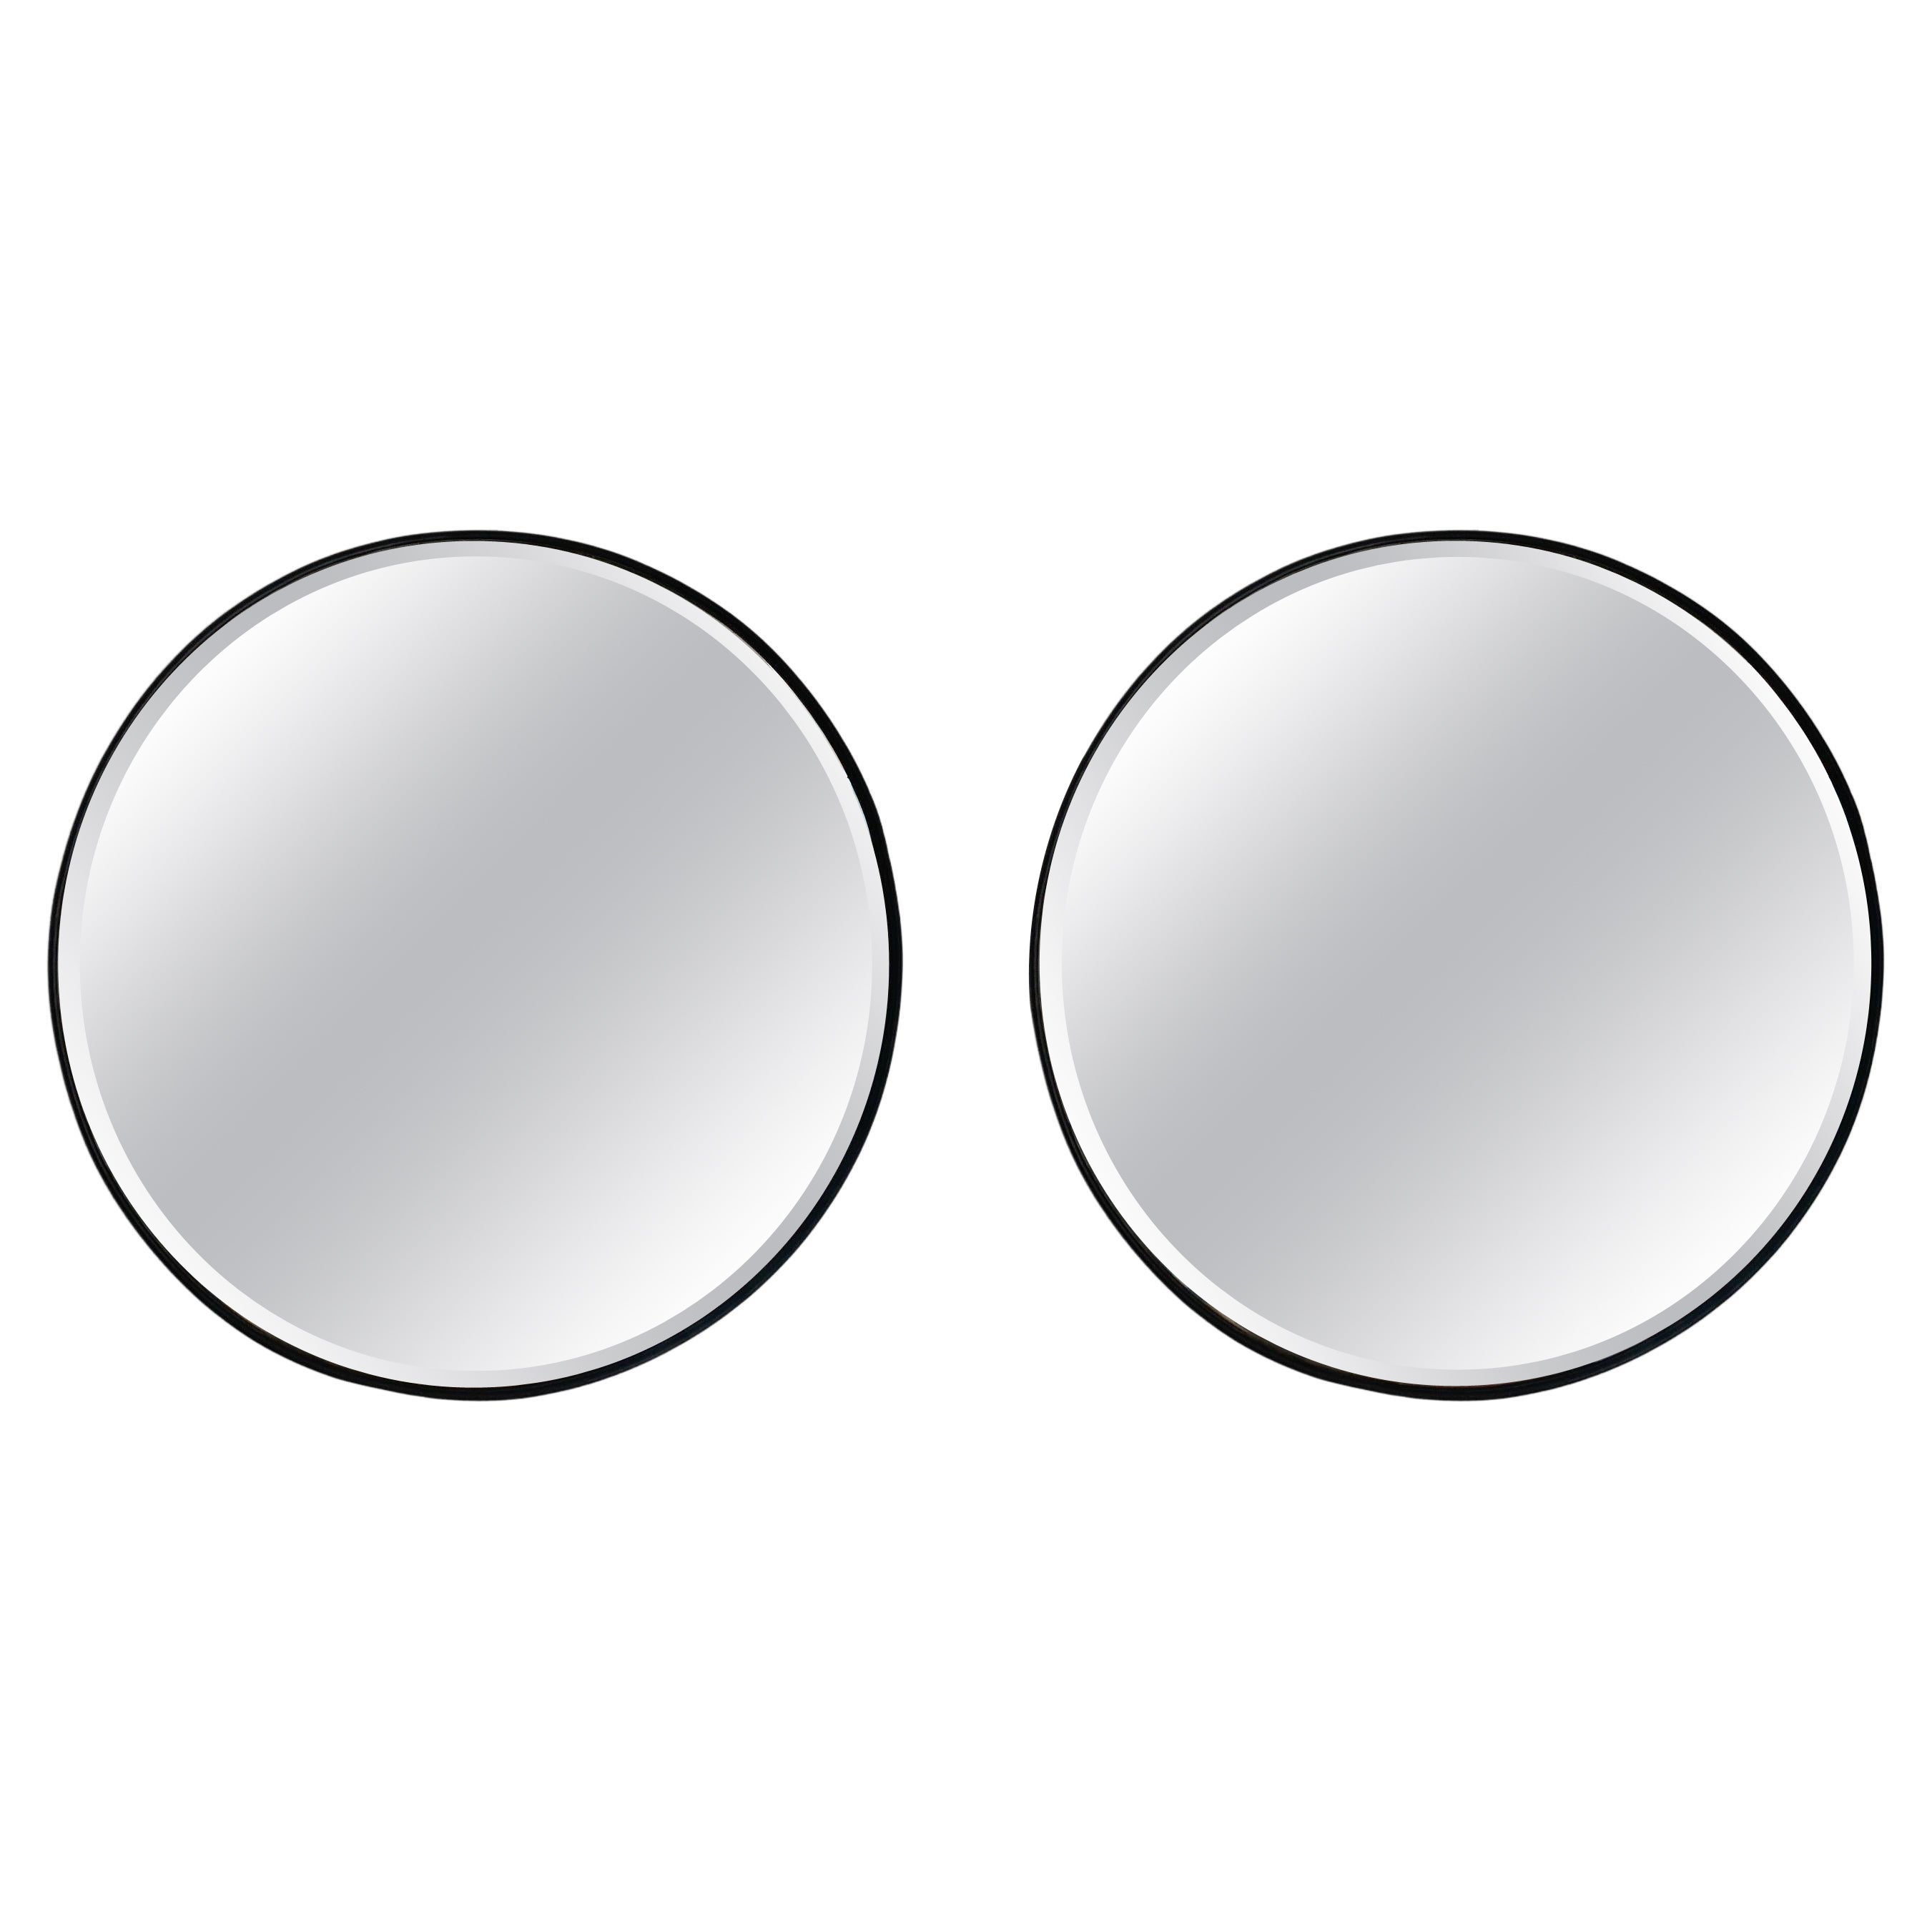 Pair of Fine Edged 1930s Art Deco Circular Mirrors For Sale